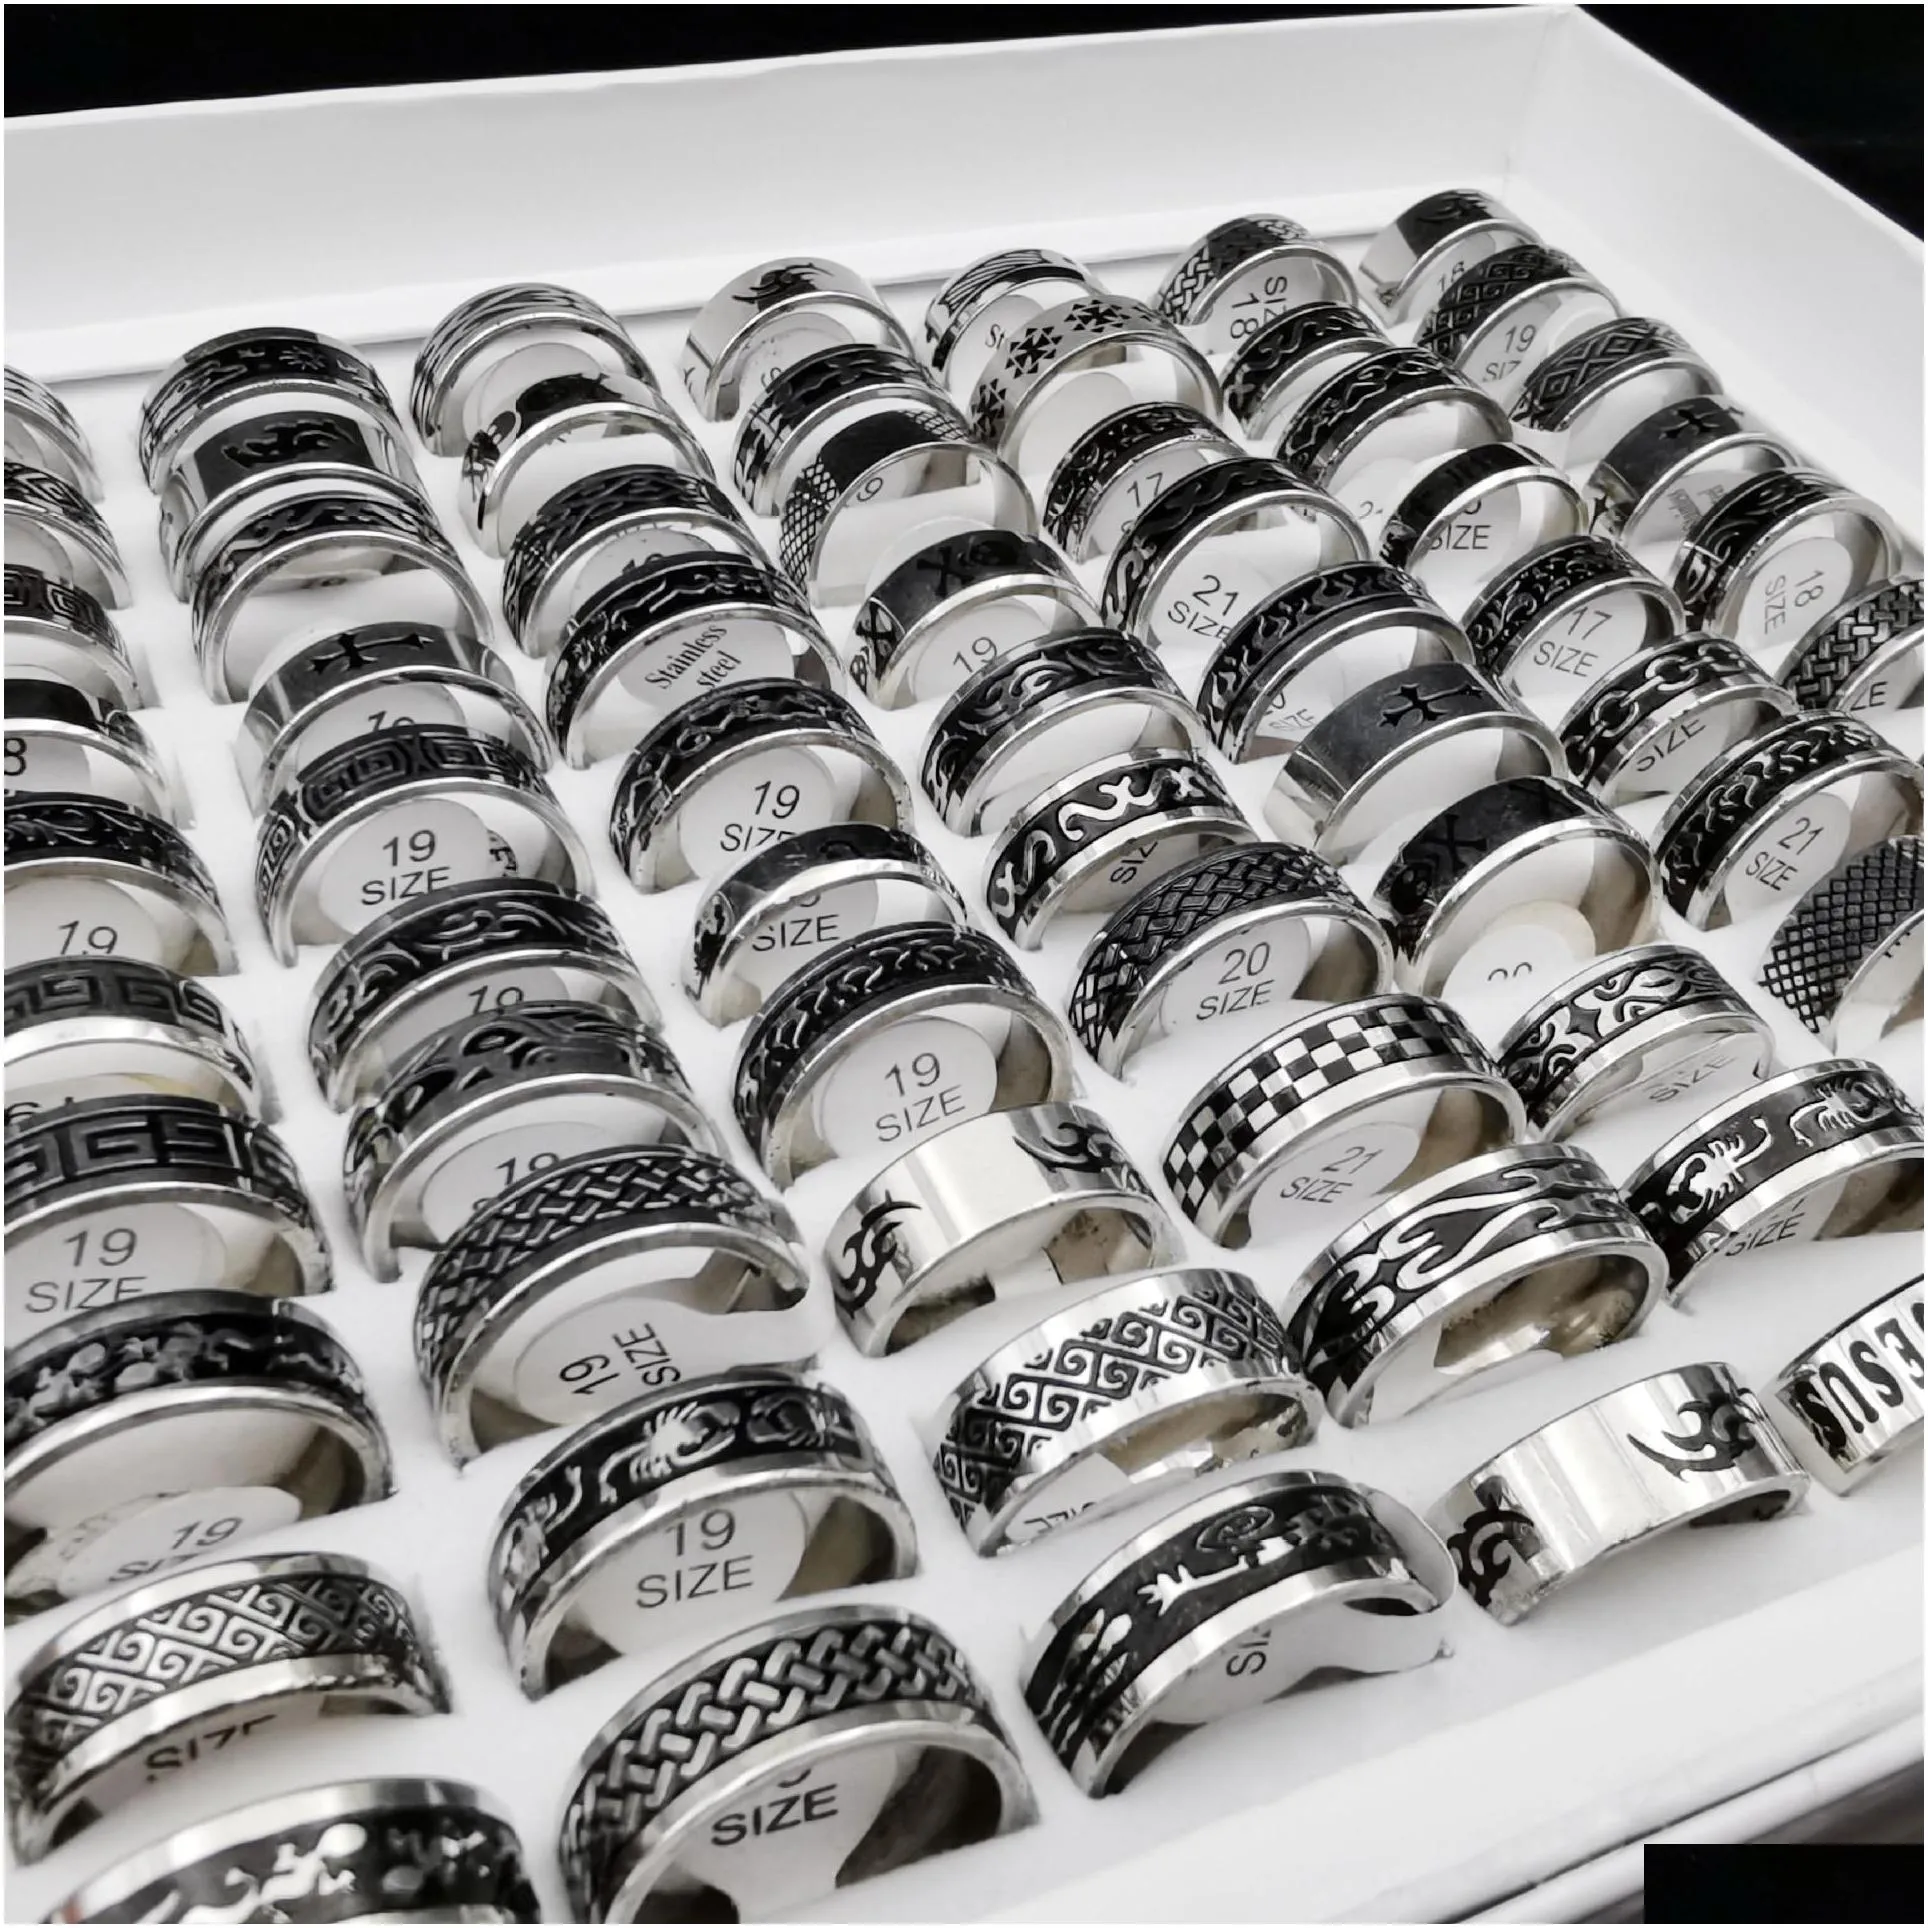 50 pcs/lot vintage retro style stainless steel rings for men and women fashion round punk rings gift accessories wholesale